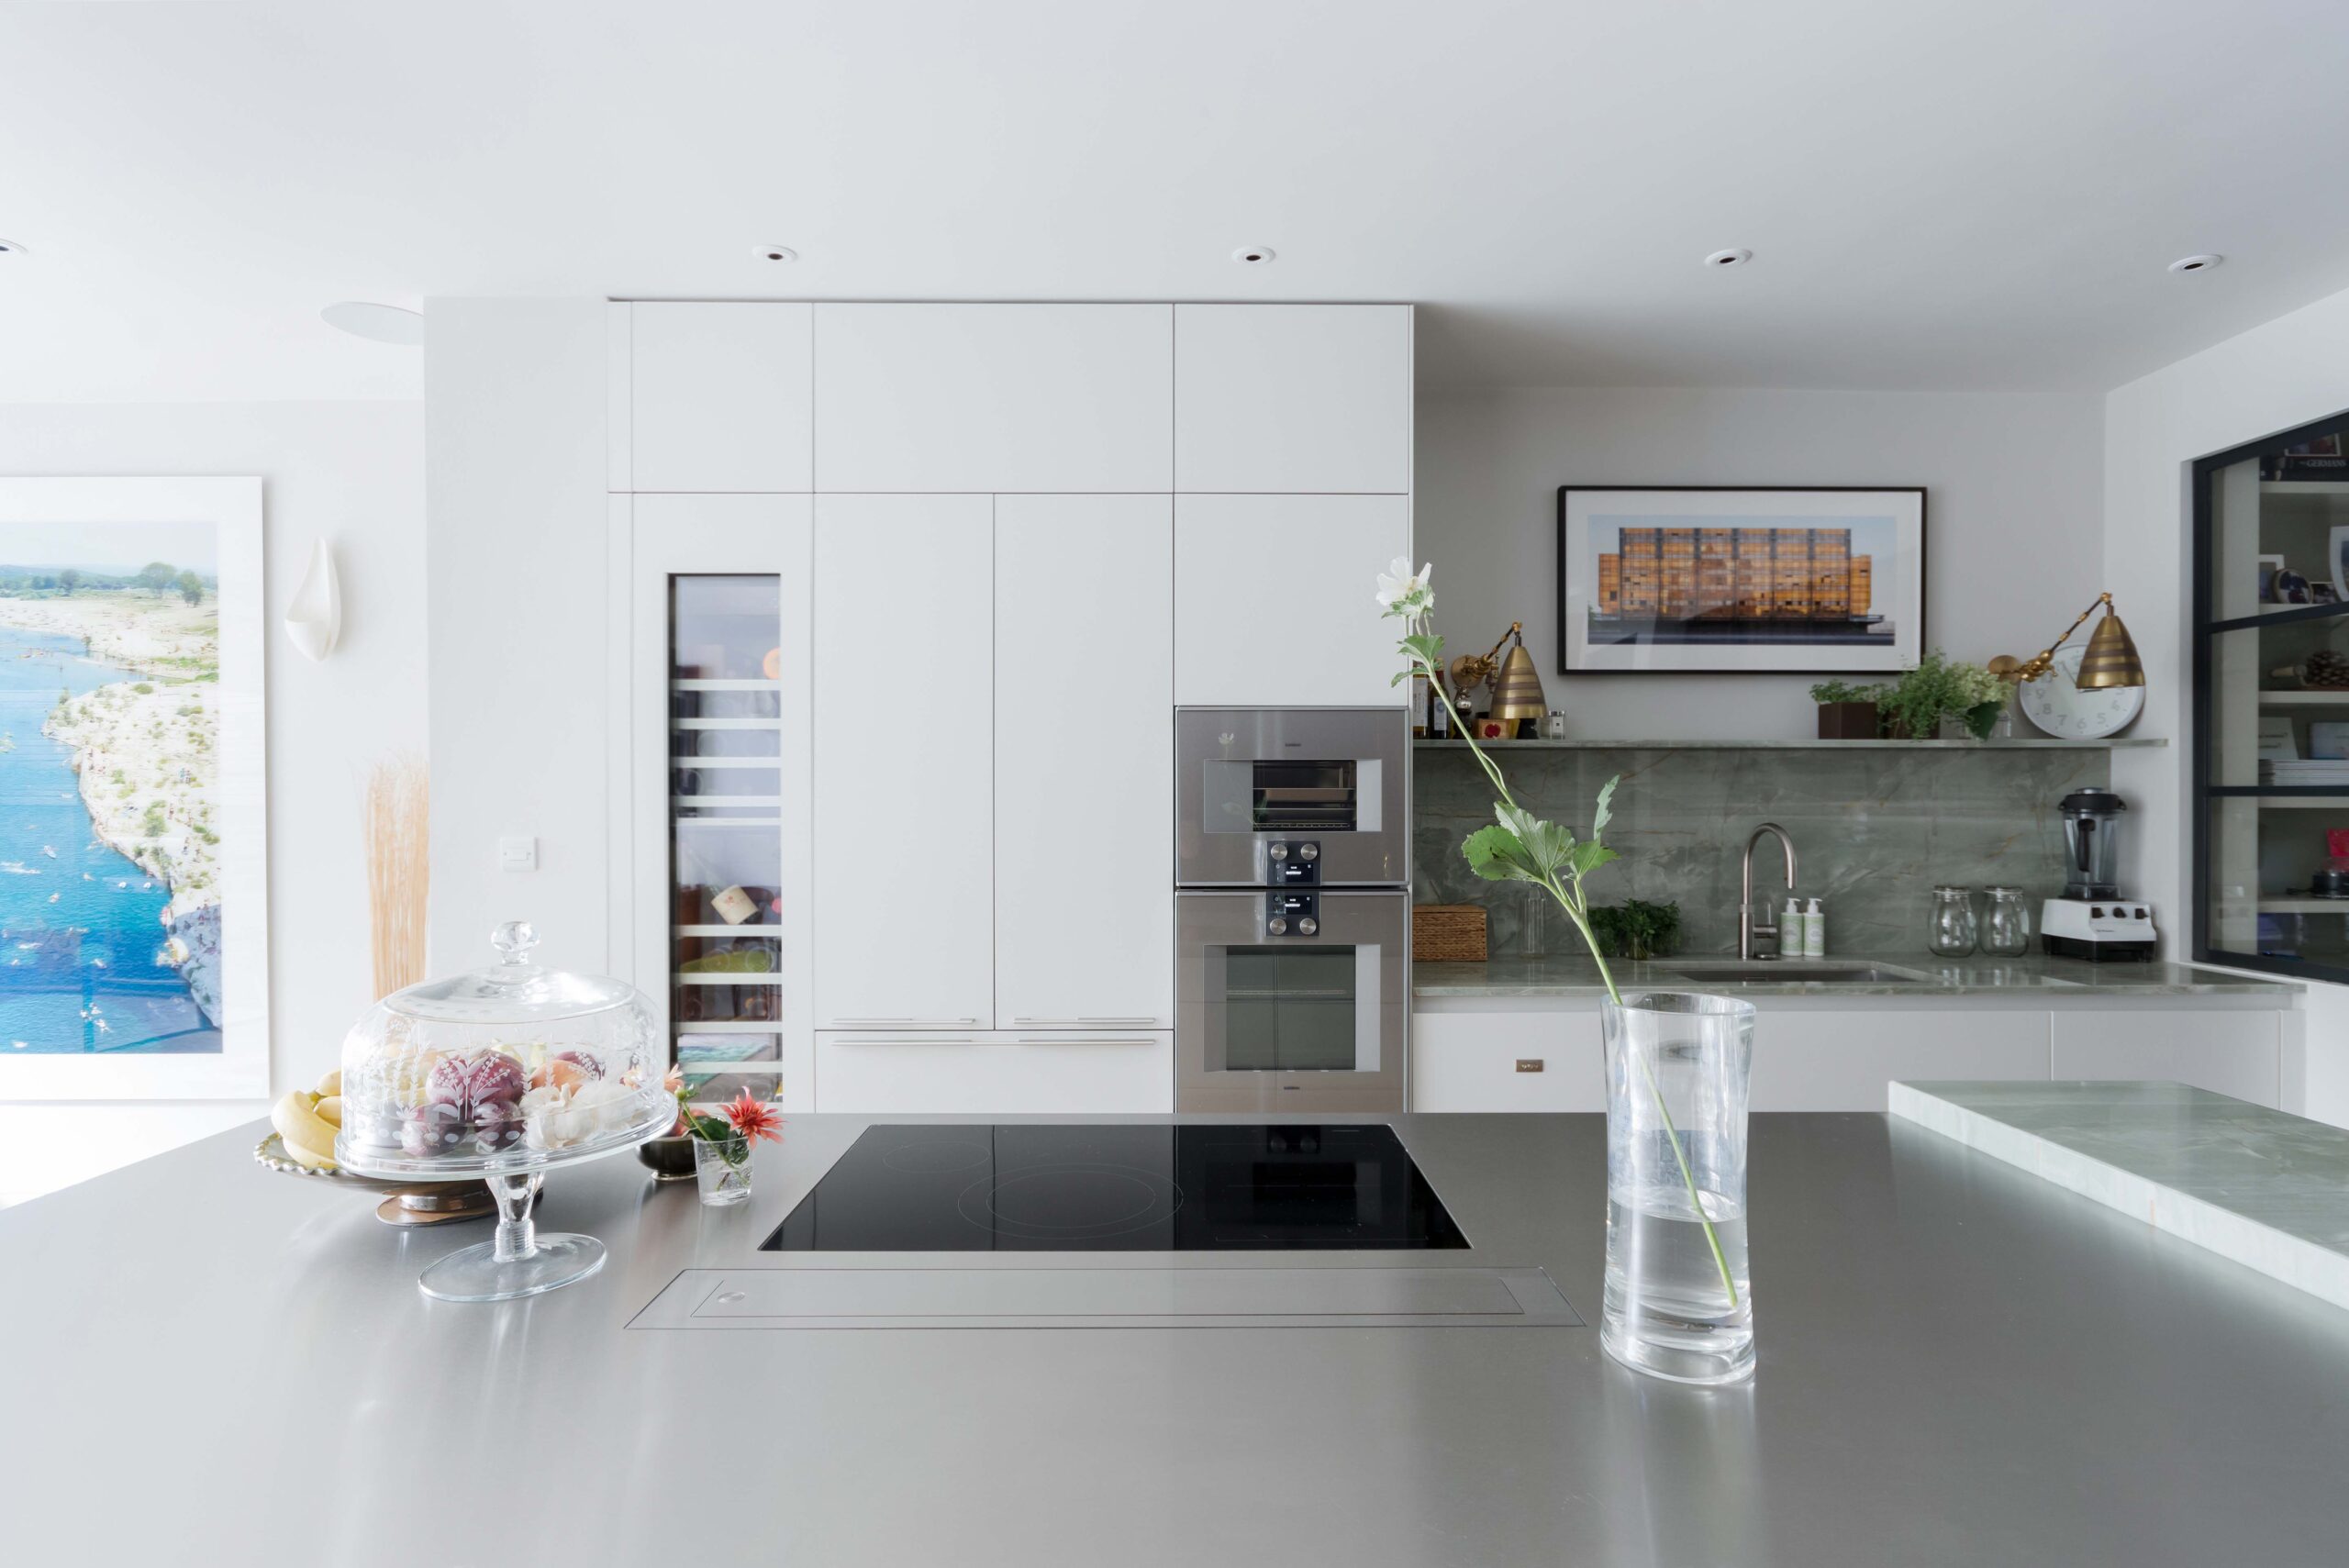 Hammersmith Grove contemporary kitchen with central island and whitewashed cabinets